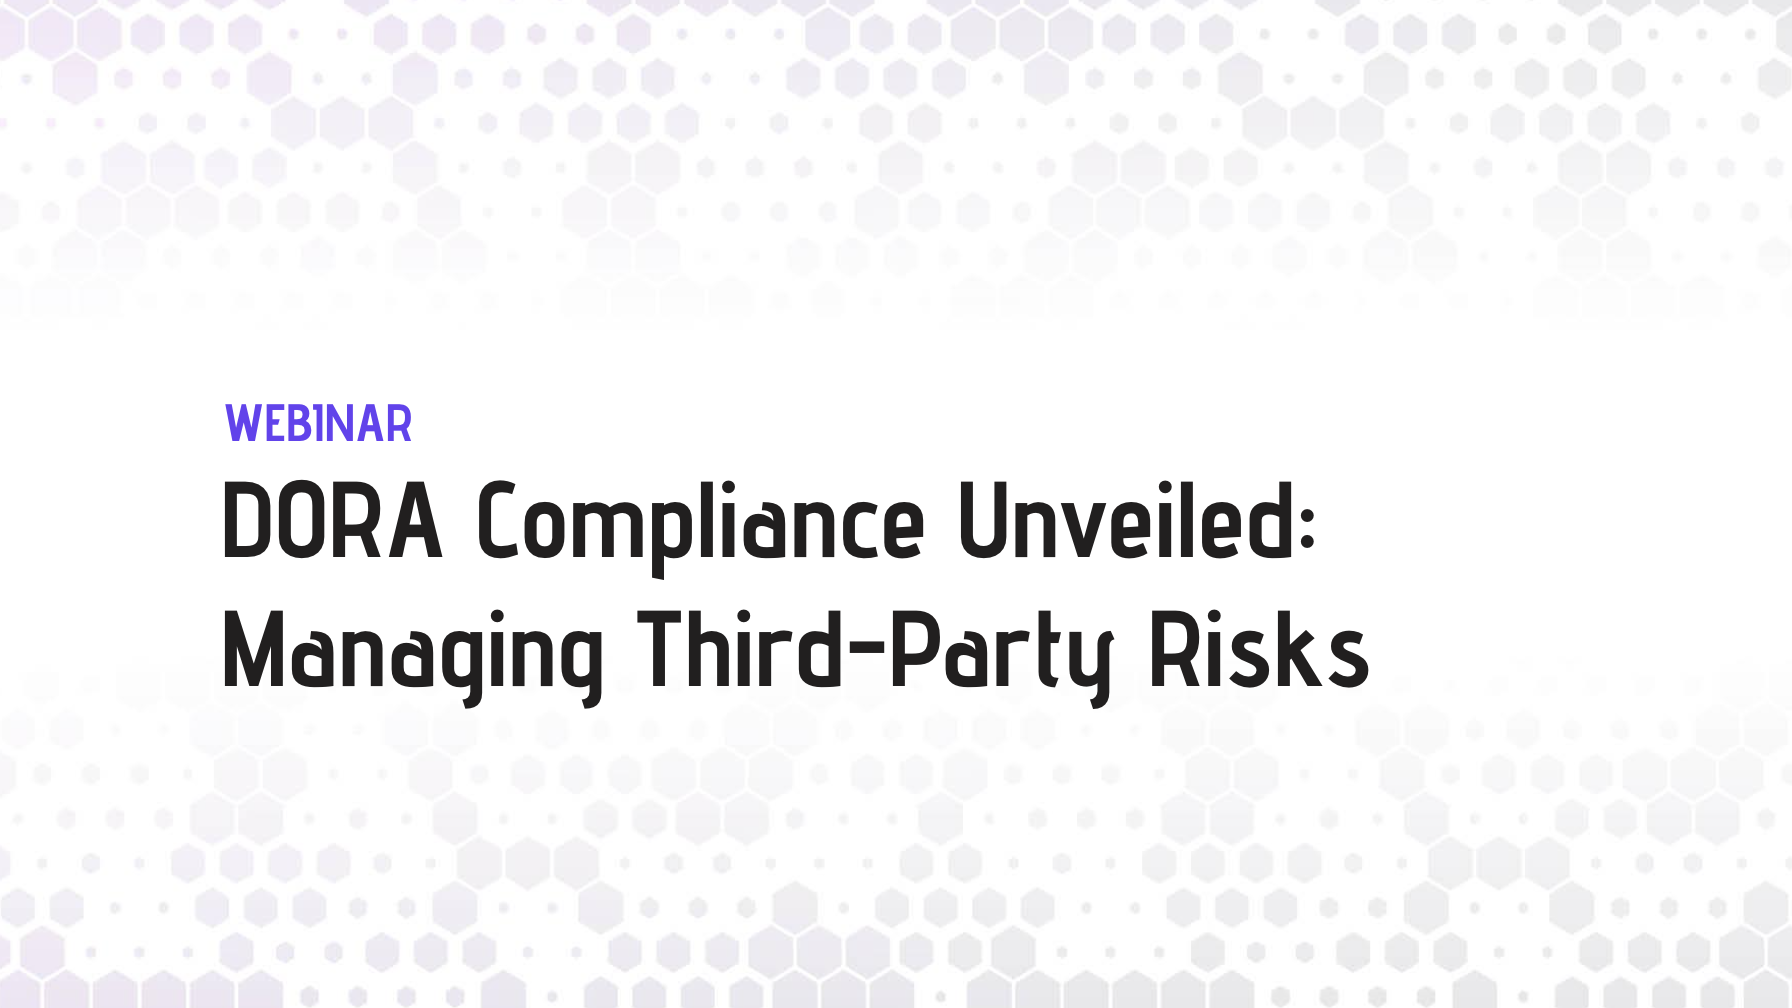 DORA Compliance Unveiled: Managing Third-Party Risks